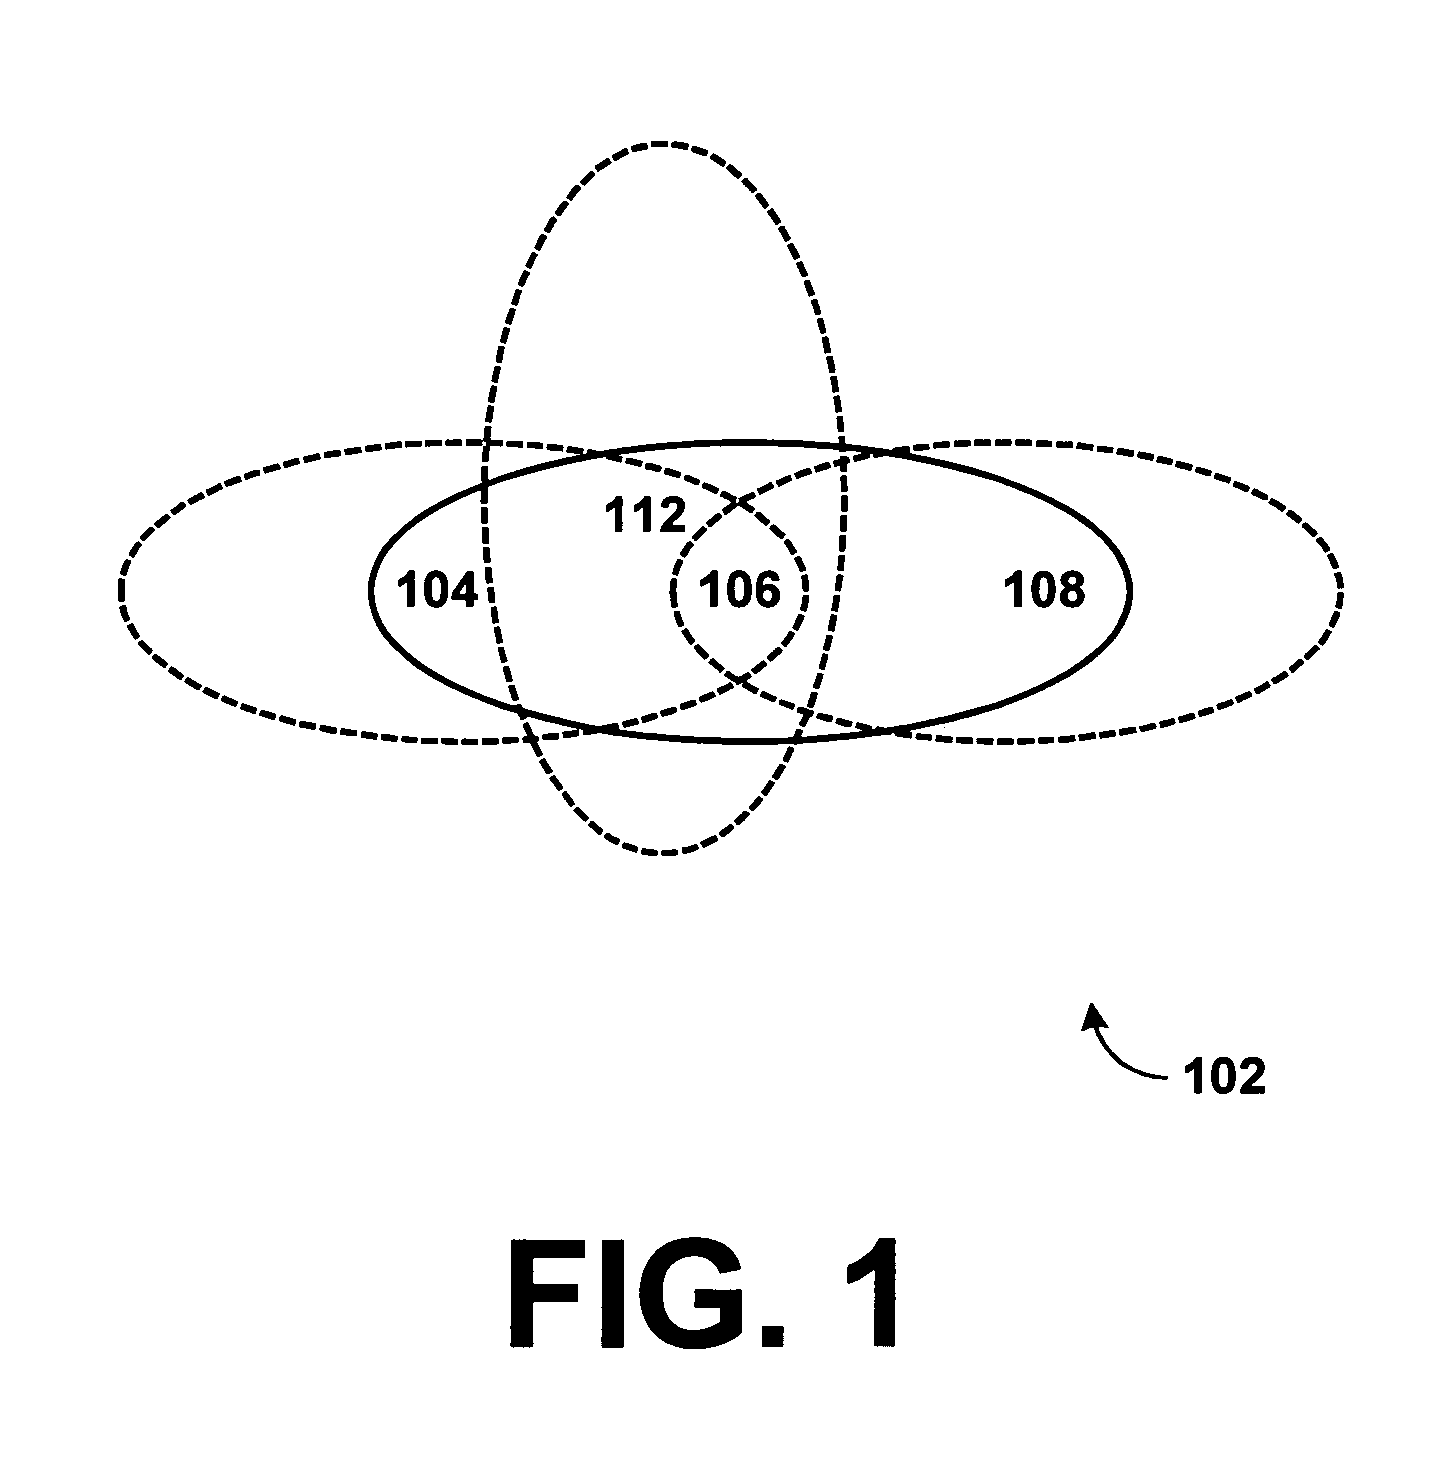 System and method for providing high speed wireless media access